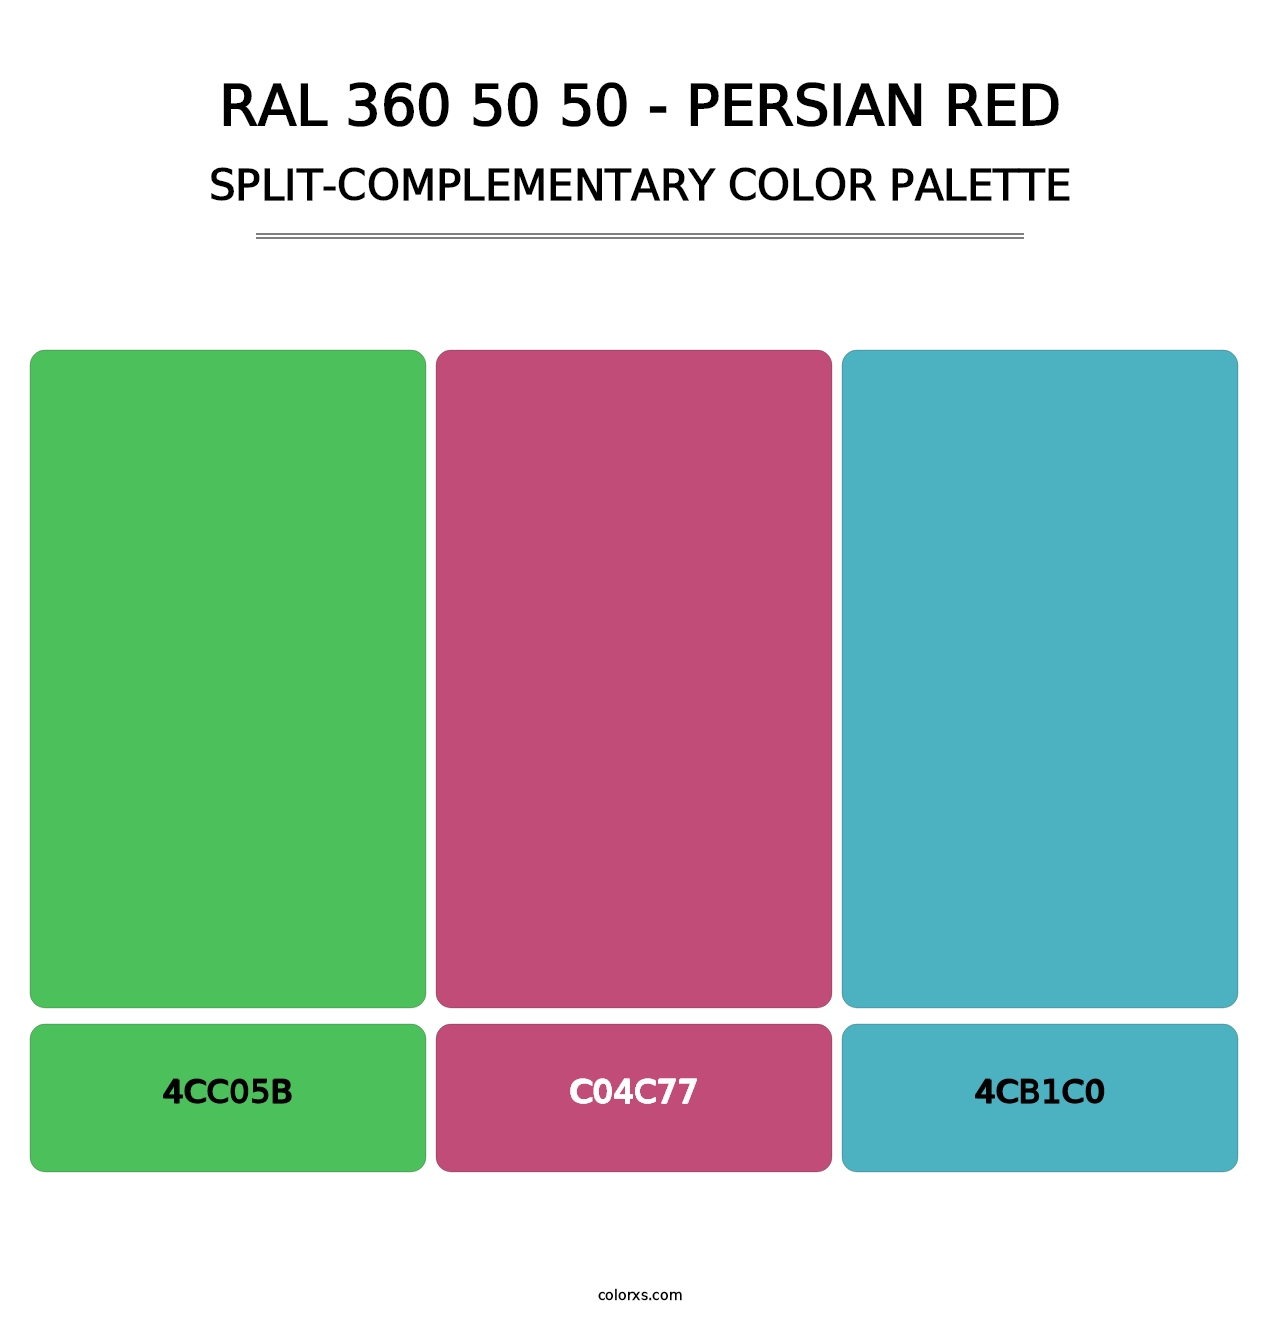 RAL 360 50 50 - Persian Red - Split-Complementary Color Palette